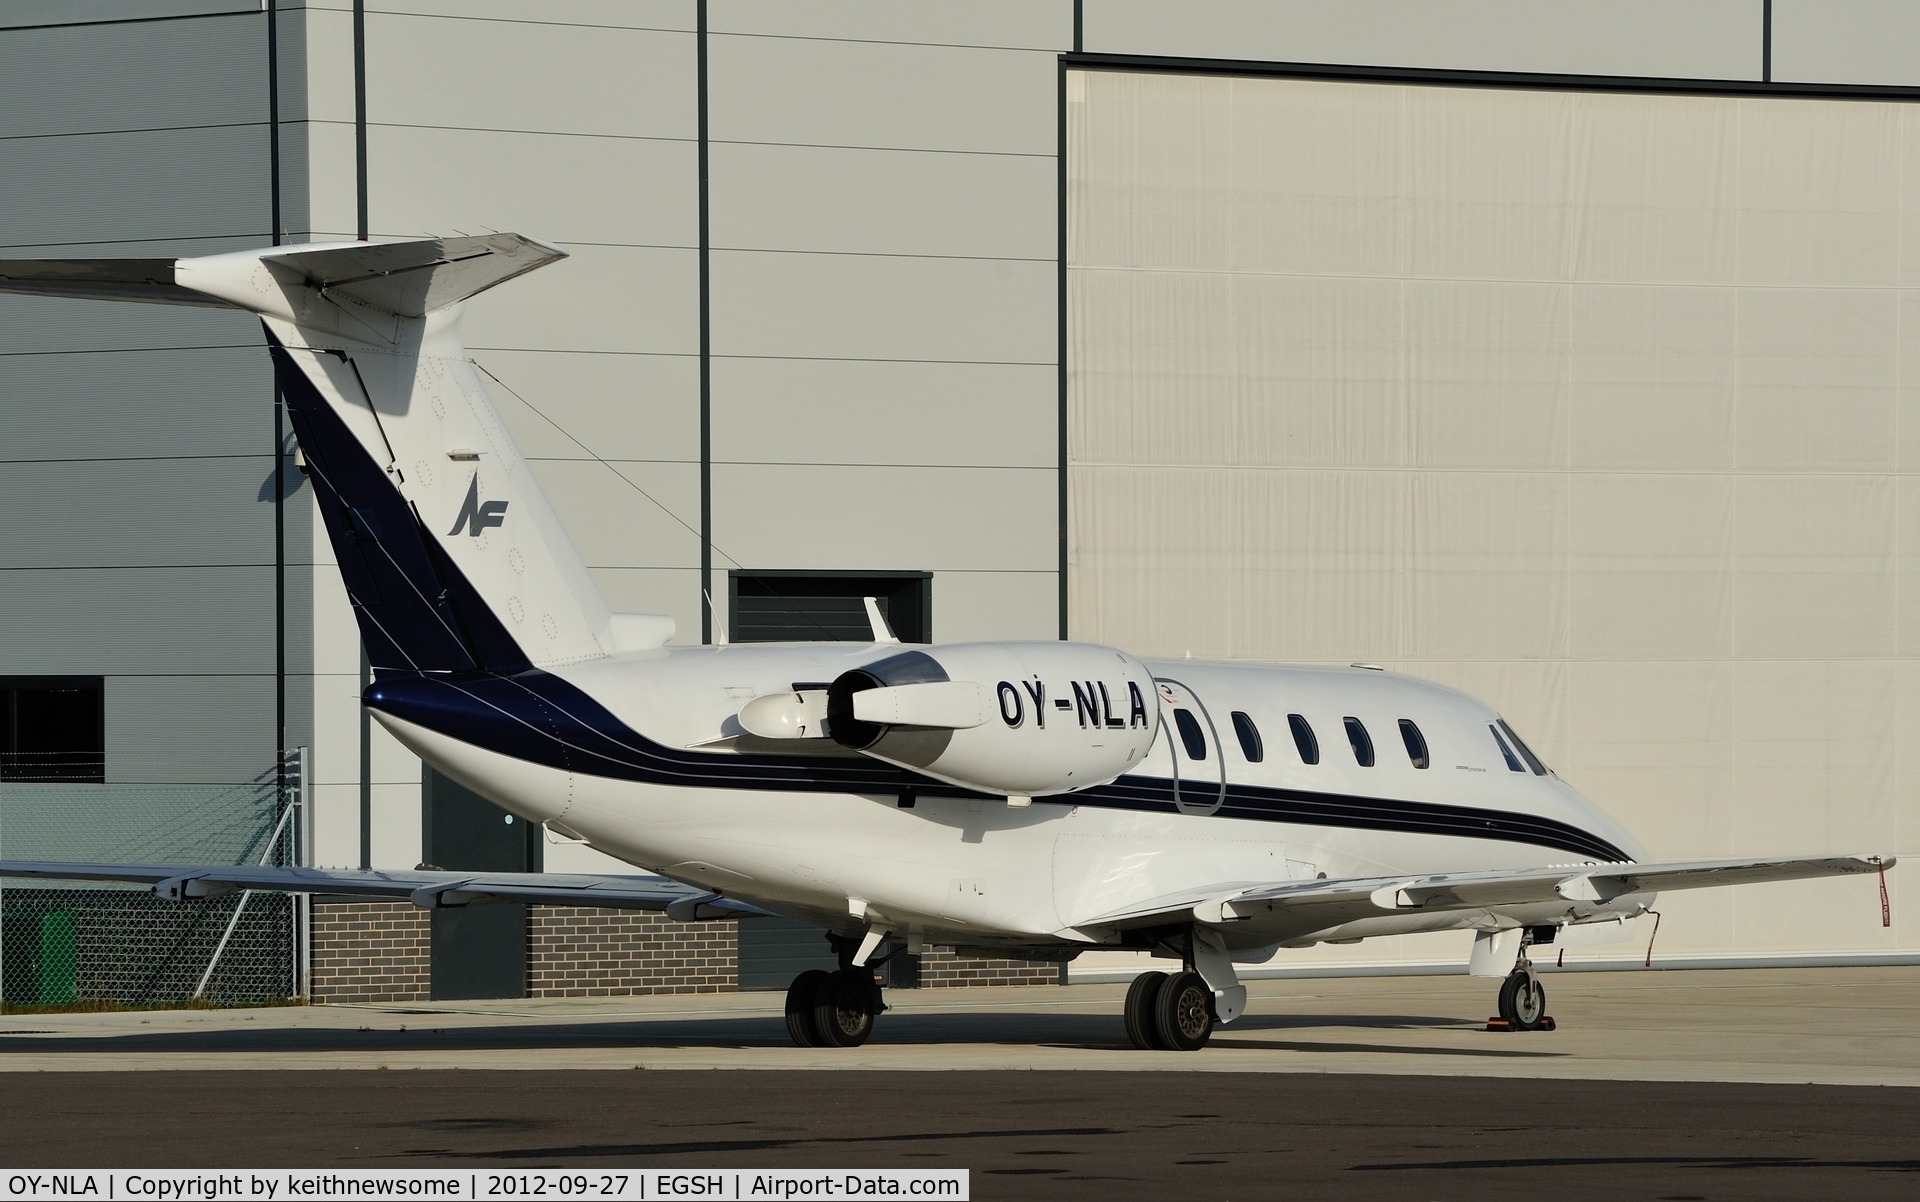 OY-NLA, 1984 Cessna 650 Citation III C/N 650-0070, One of two NF Cessna Citations visiting today !